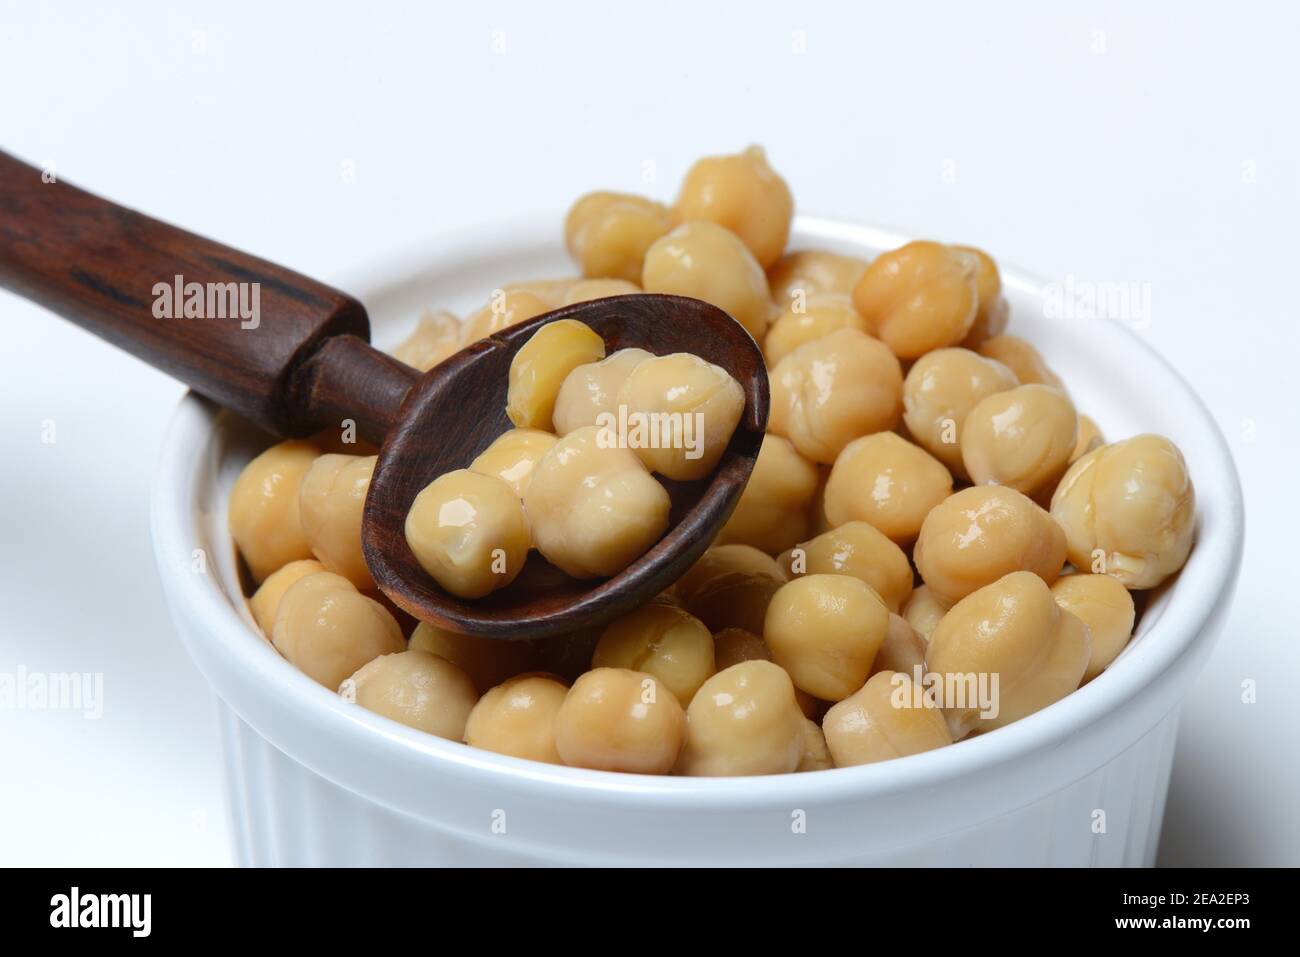 Chickpeas ( Cicer arietinum) in bowl with wooden spoon Stock Photo